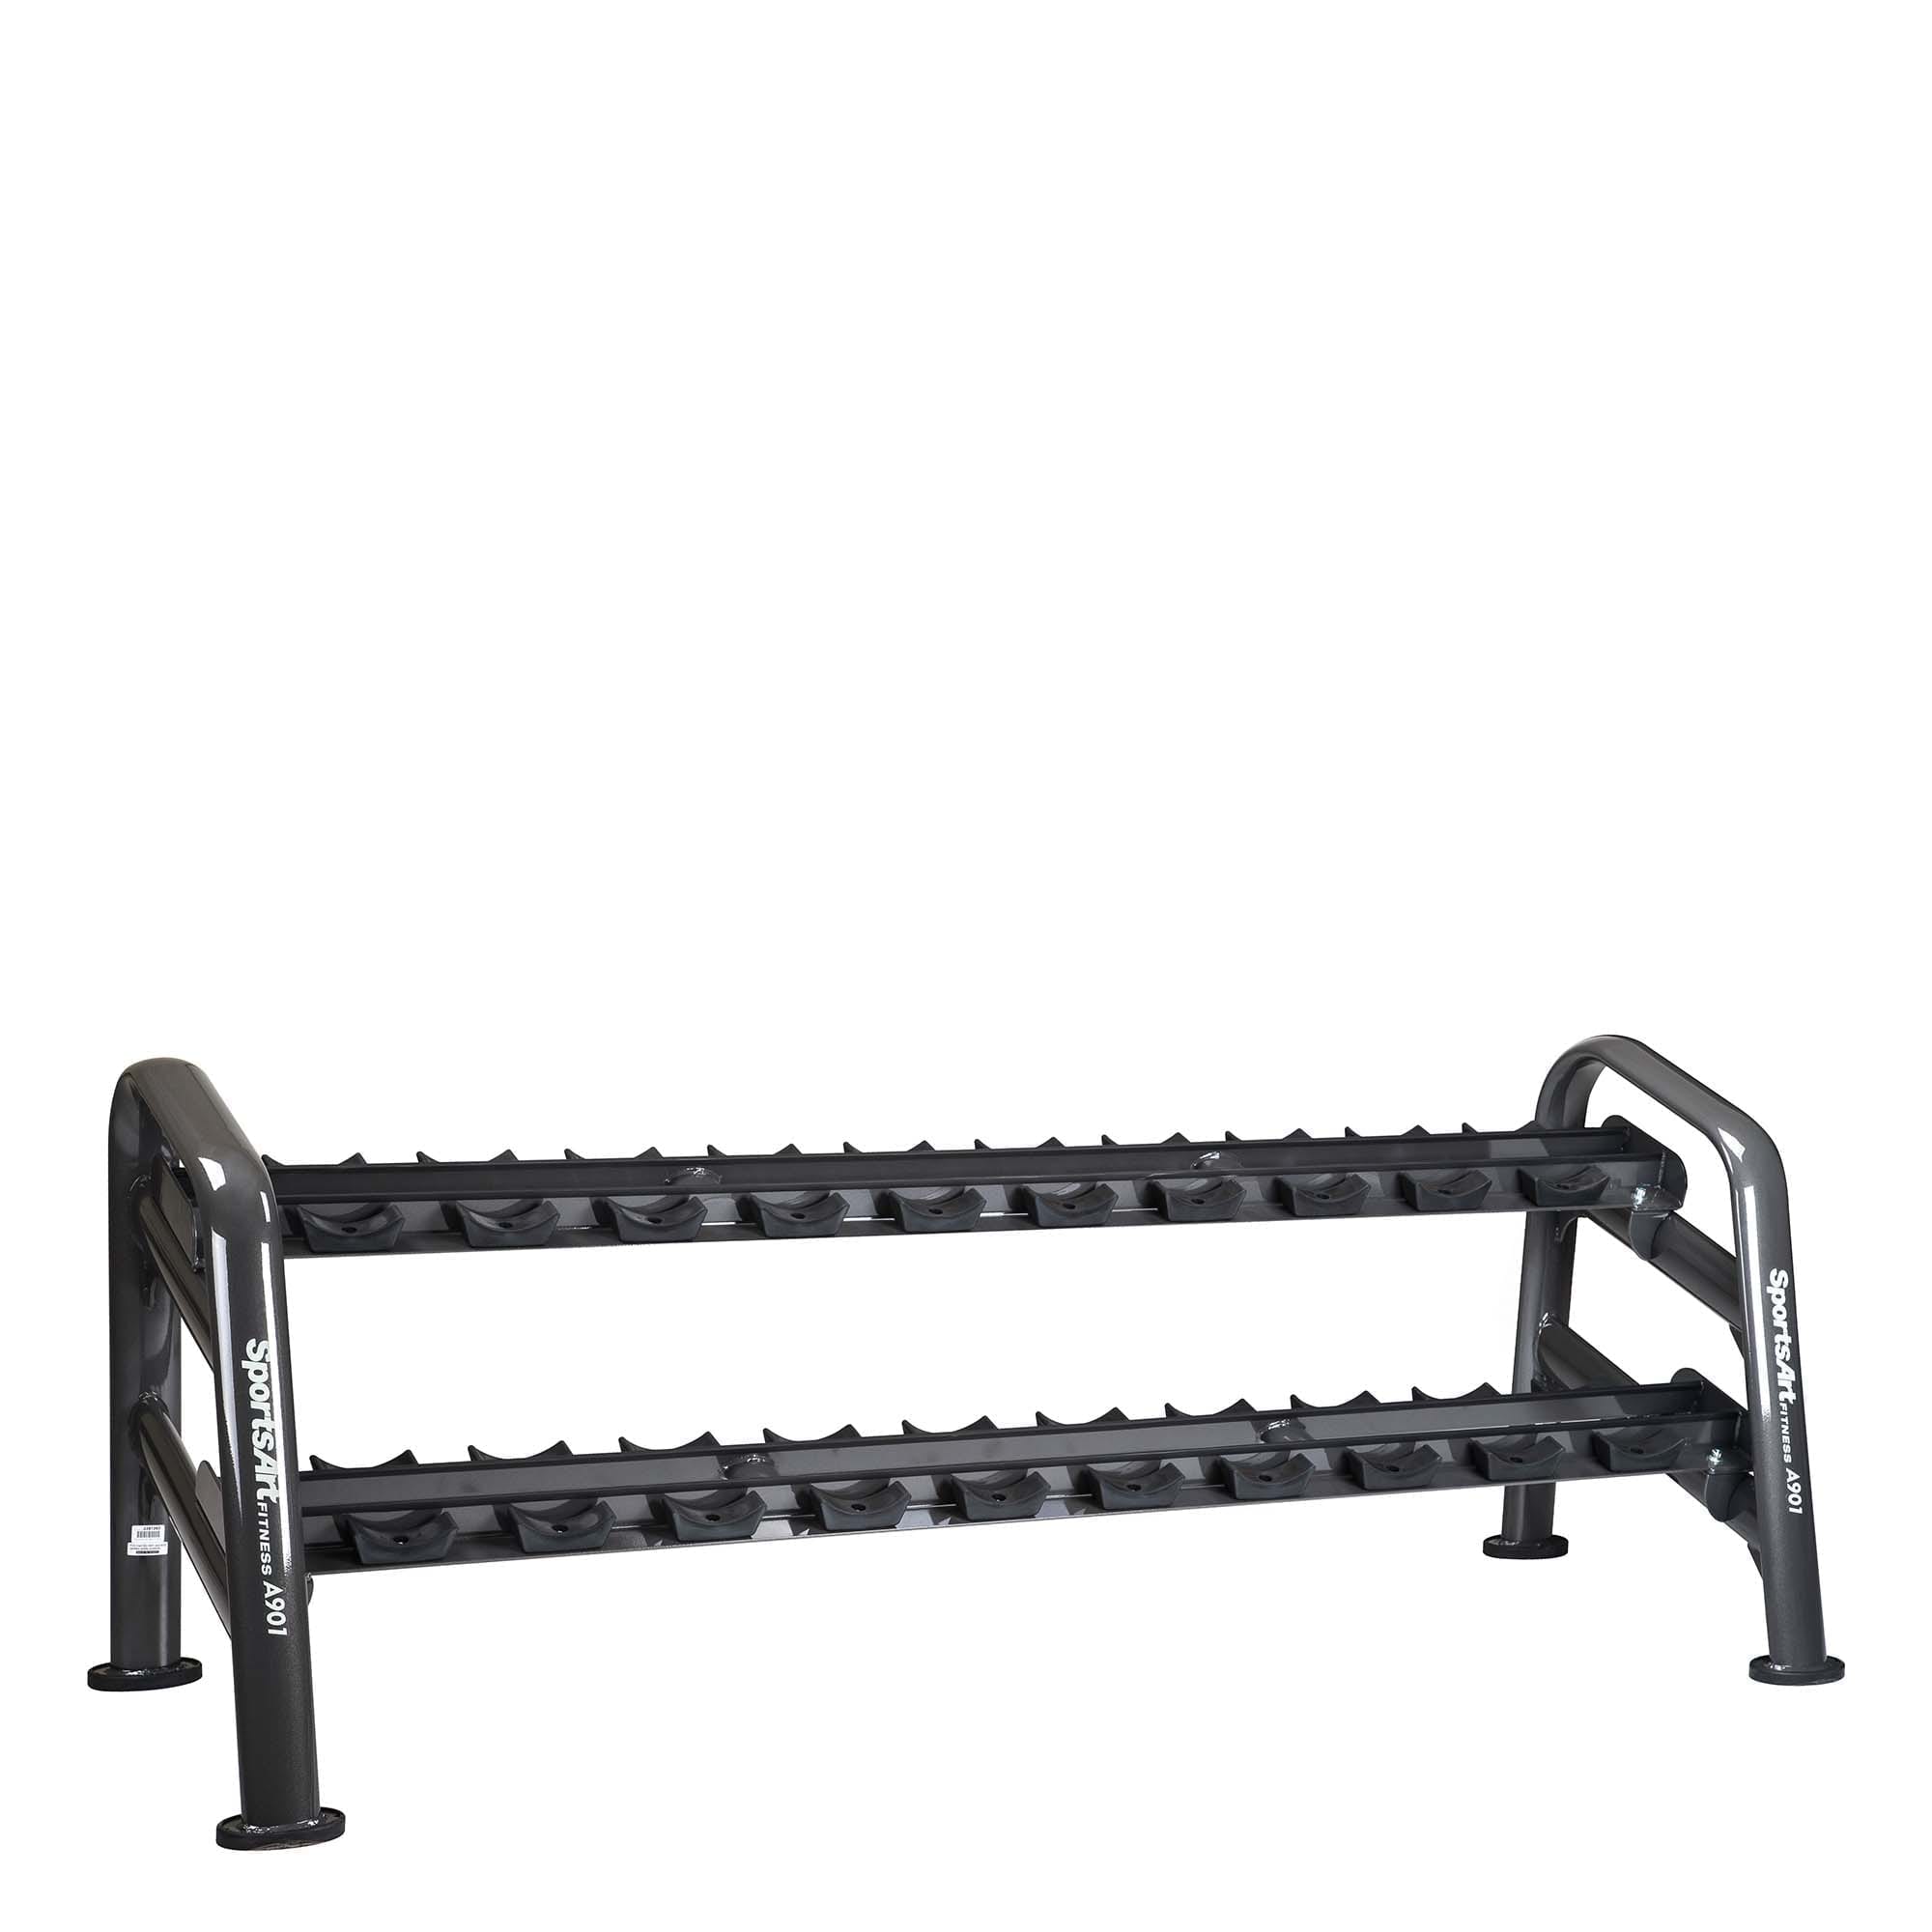 STATUS SERIES 10 PAIR PRO STYLE 2-TIER DUMBBELL RACK – SPORTSART (A901) 1